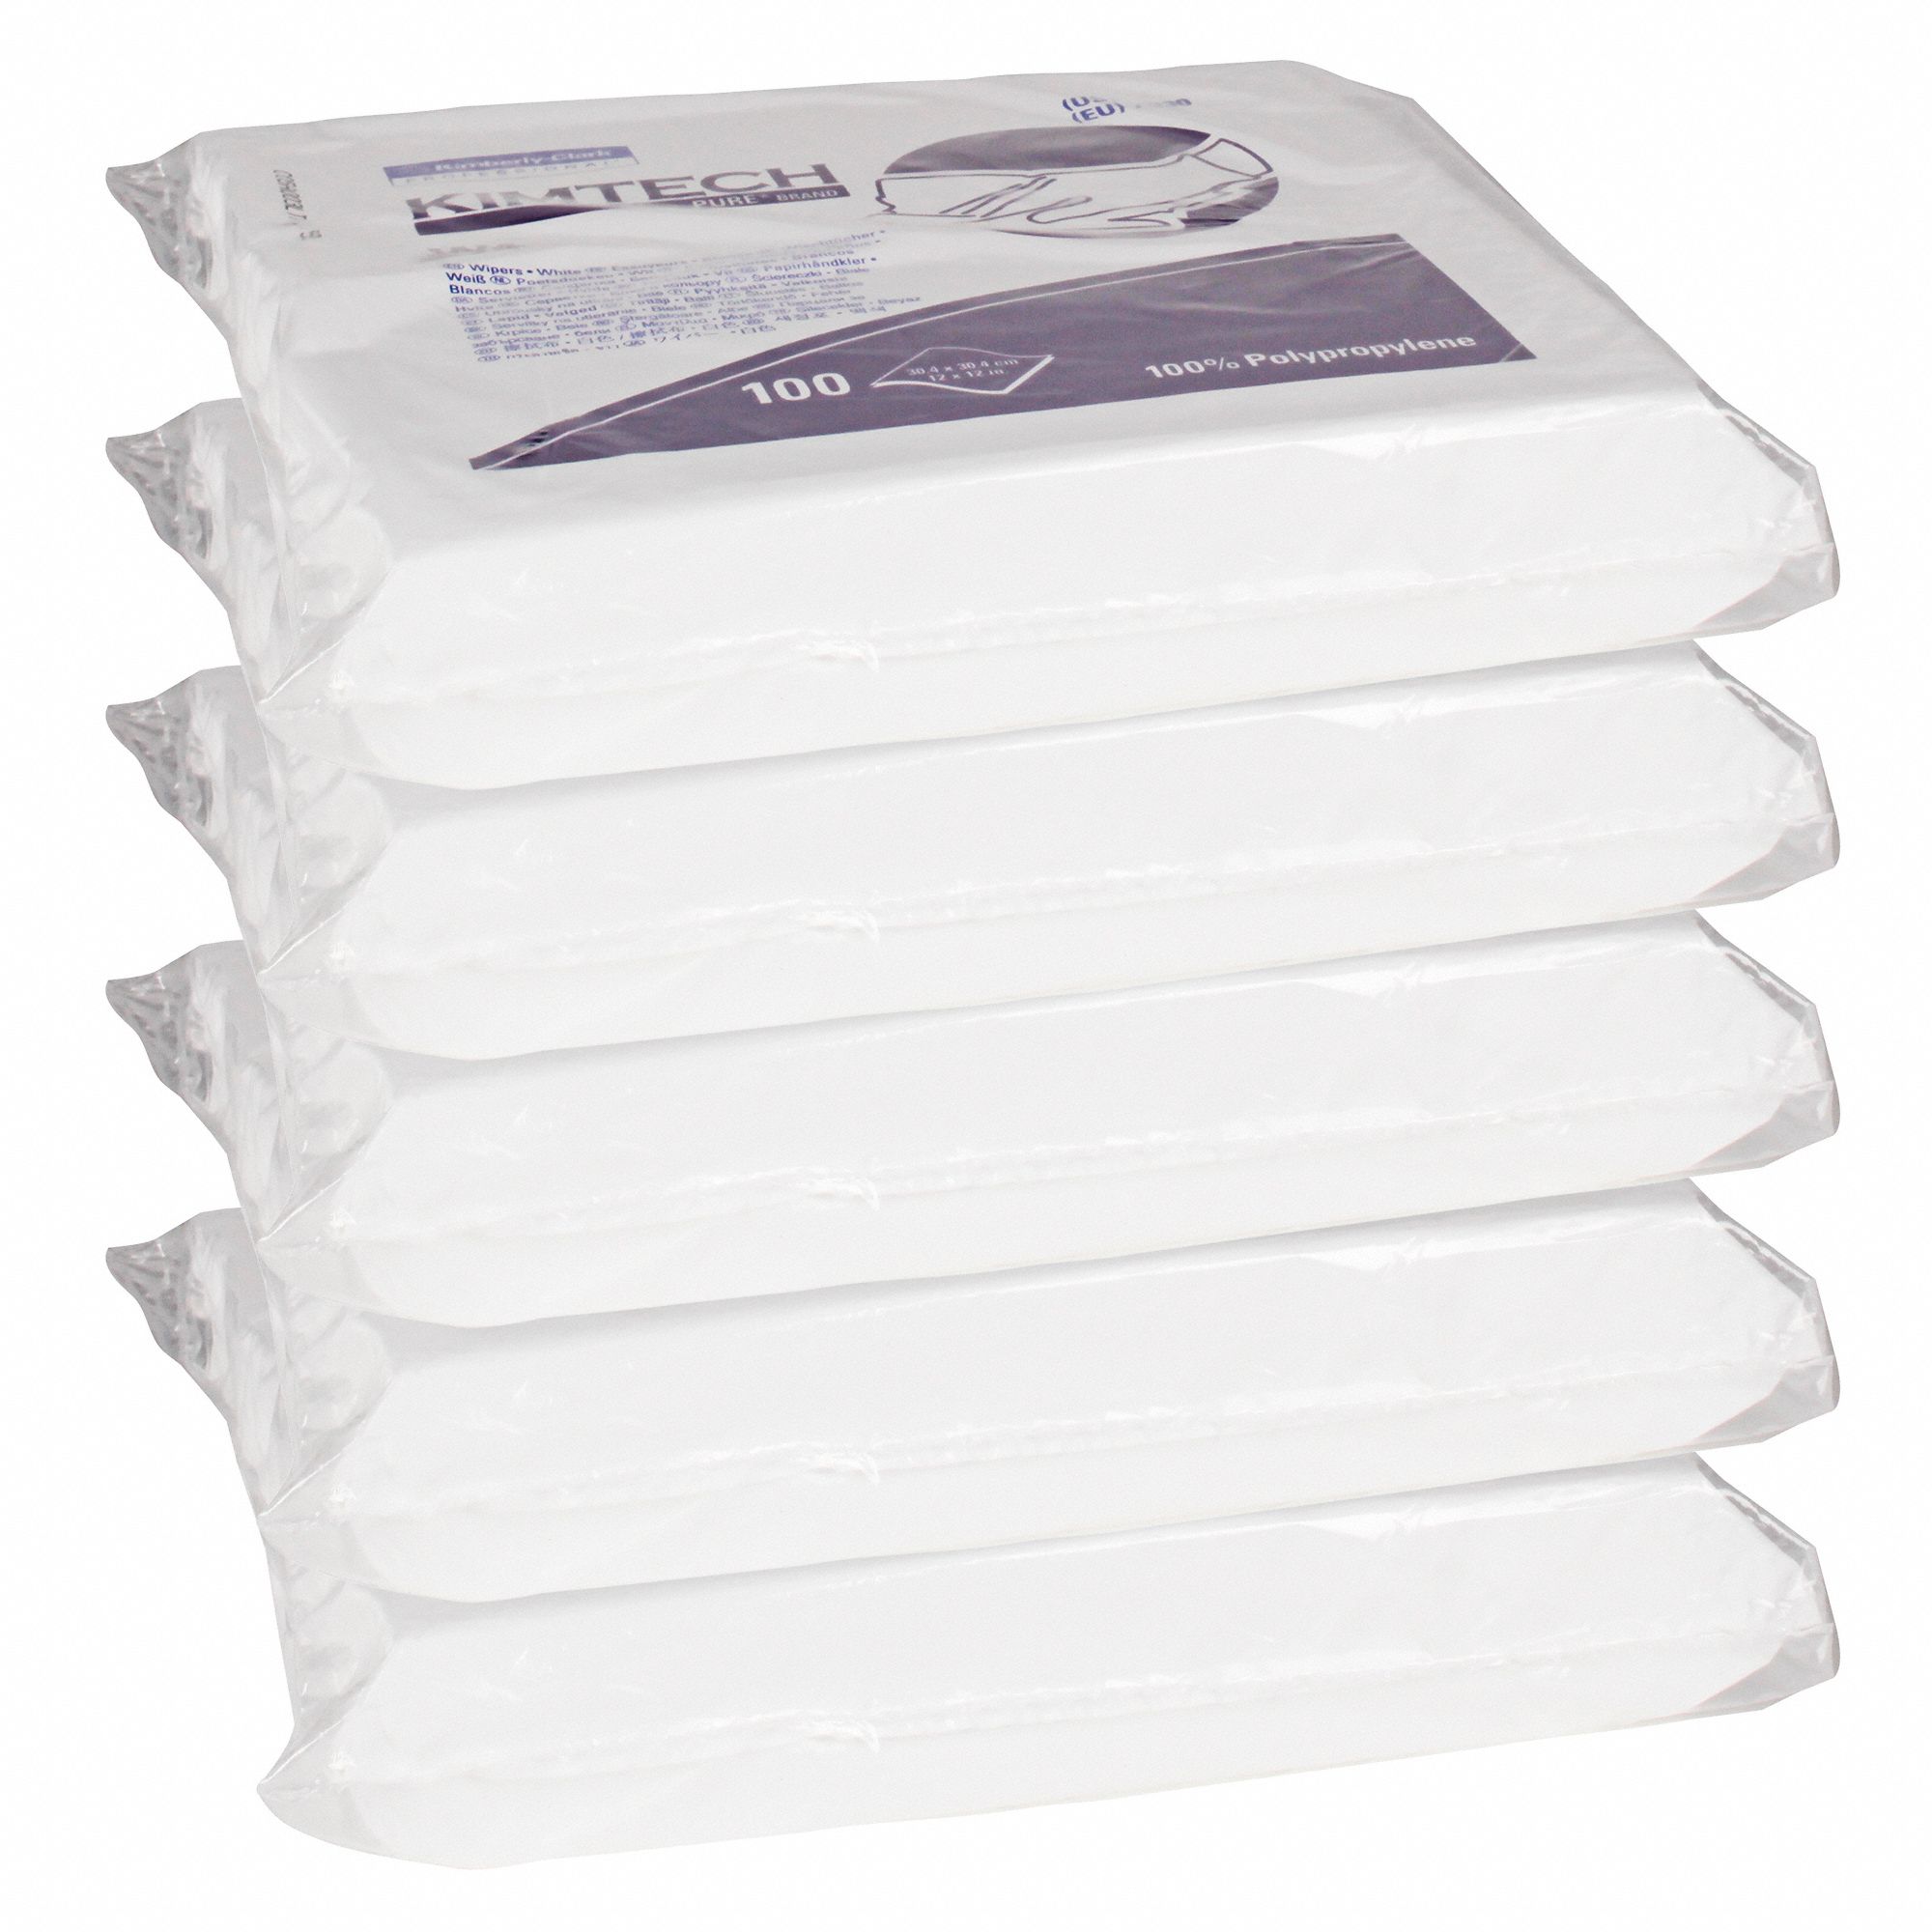 Lot of 500 Kimtech Pure W4 33330 Dry Cleanroom Anti-Static Low-Lint Wipes 